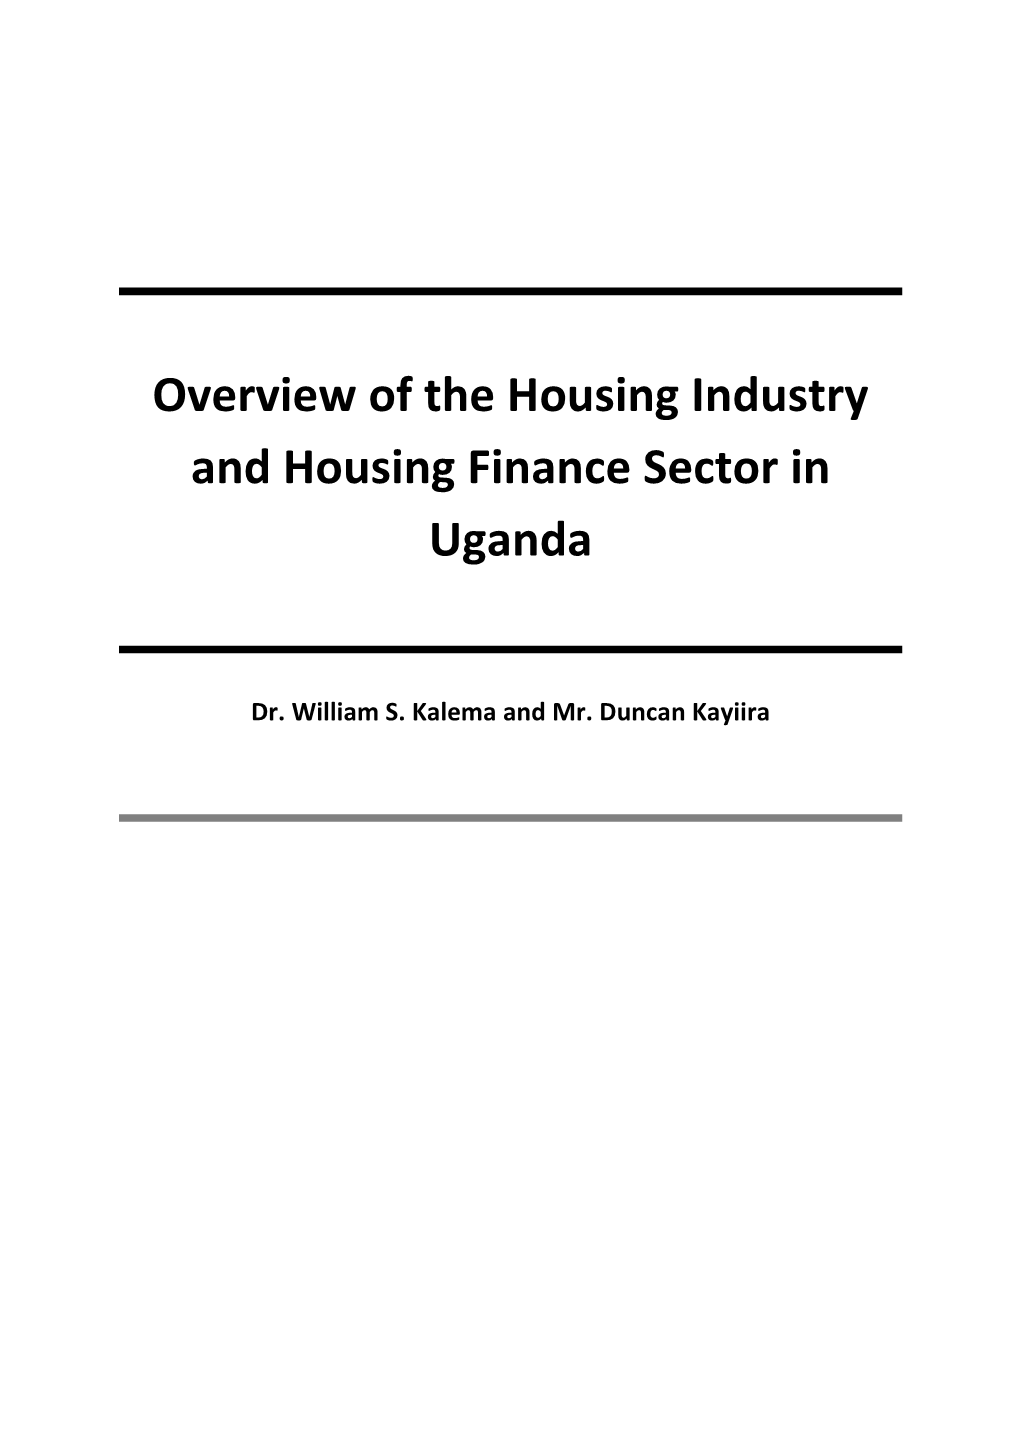 Overview of the Housing Industry and Housing Finance Sector in Uganda